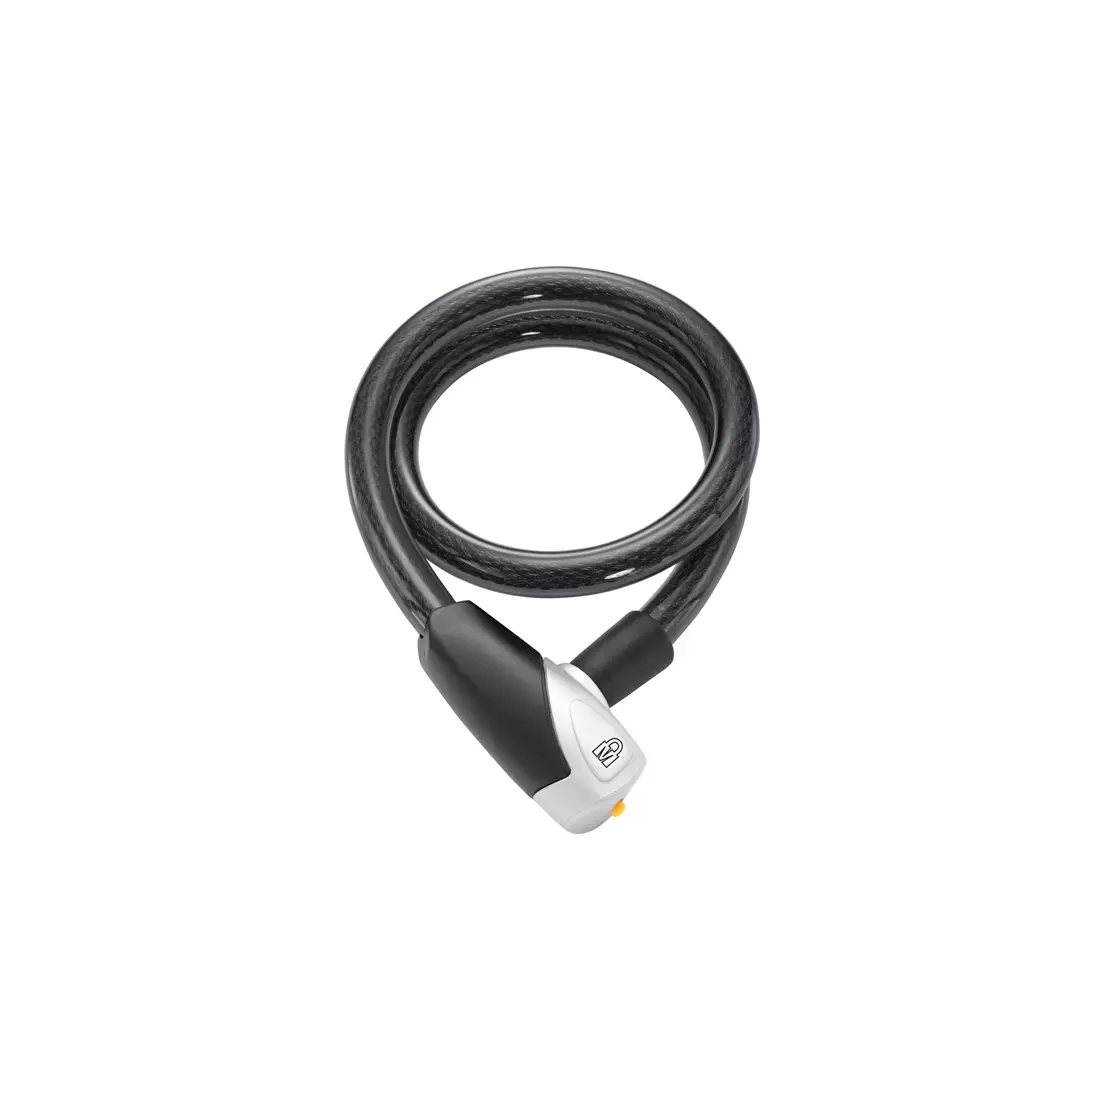 MAGNUM bicycle lock cord 100cm 5 keys with a code black MGN-3022